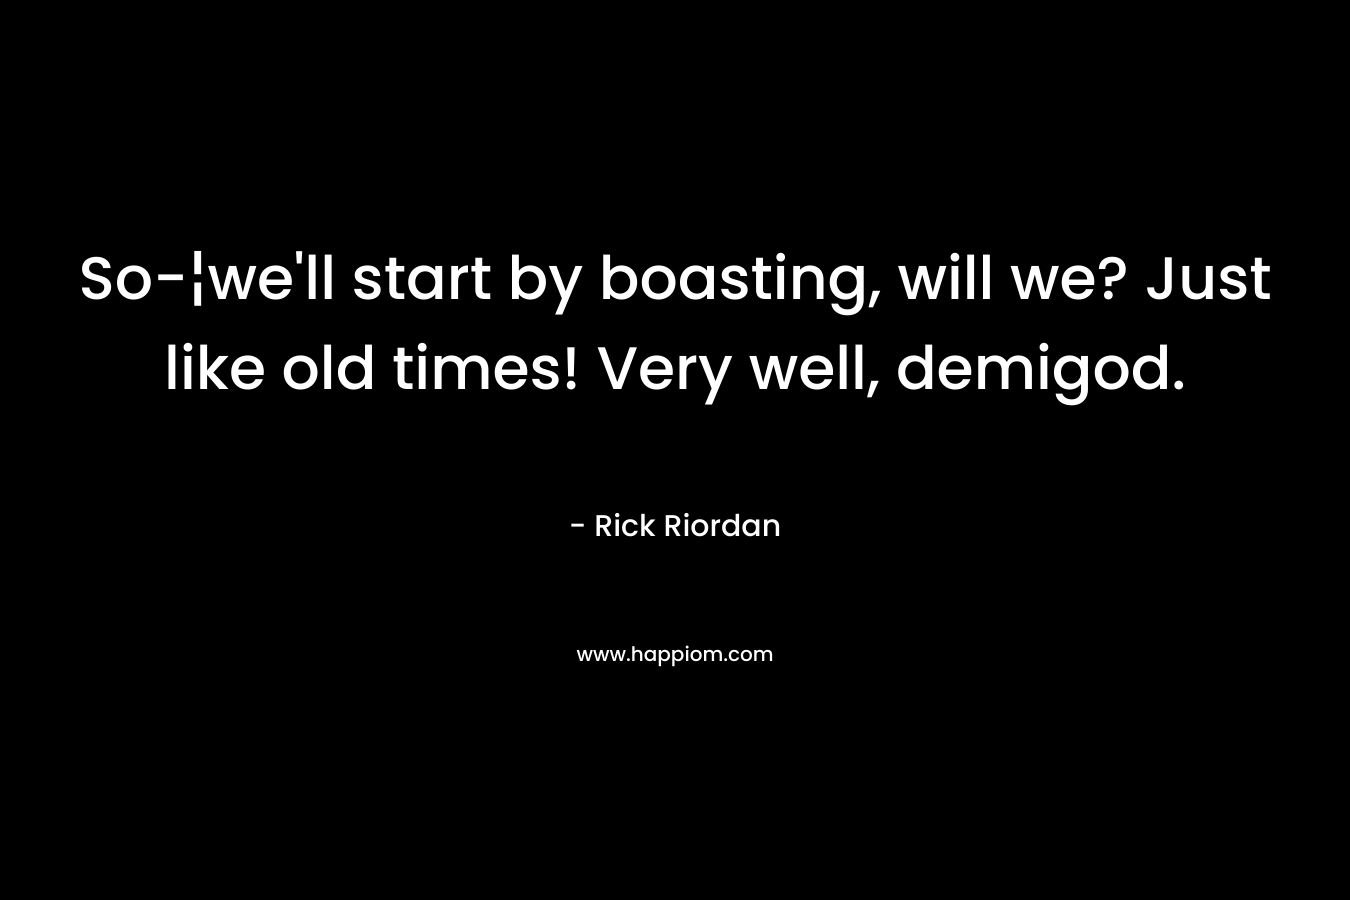 So-¦we’ll start by boasting, will we? Just like old times! Very well, demigod. – Rick Riordan